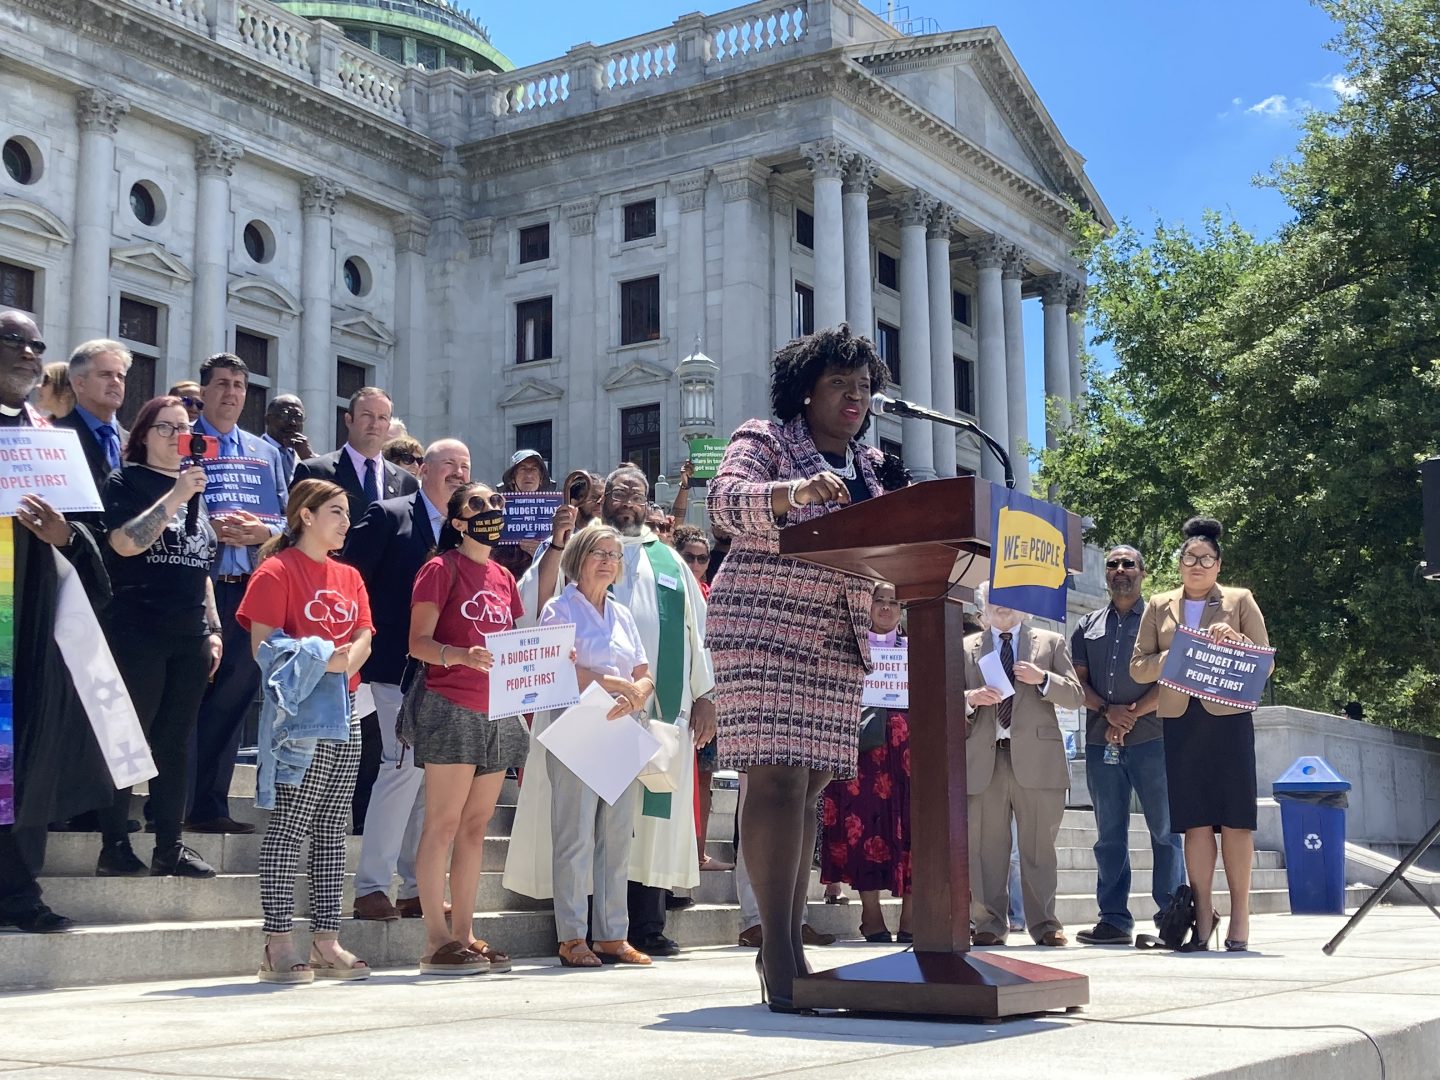 Rep. Joanna McClinton (D-Philadelphia) speaks at a rally organized by the Pennsylvania Budget and Policy Center demanding lawmakers use a surplus $10 billion in state and federal money to support underfunded schools and essential workers at the State Capitol building on June 23rd.  